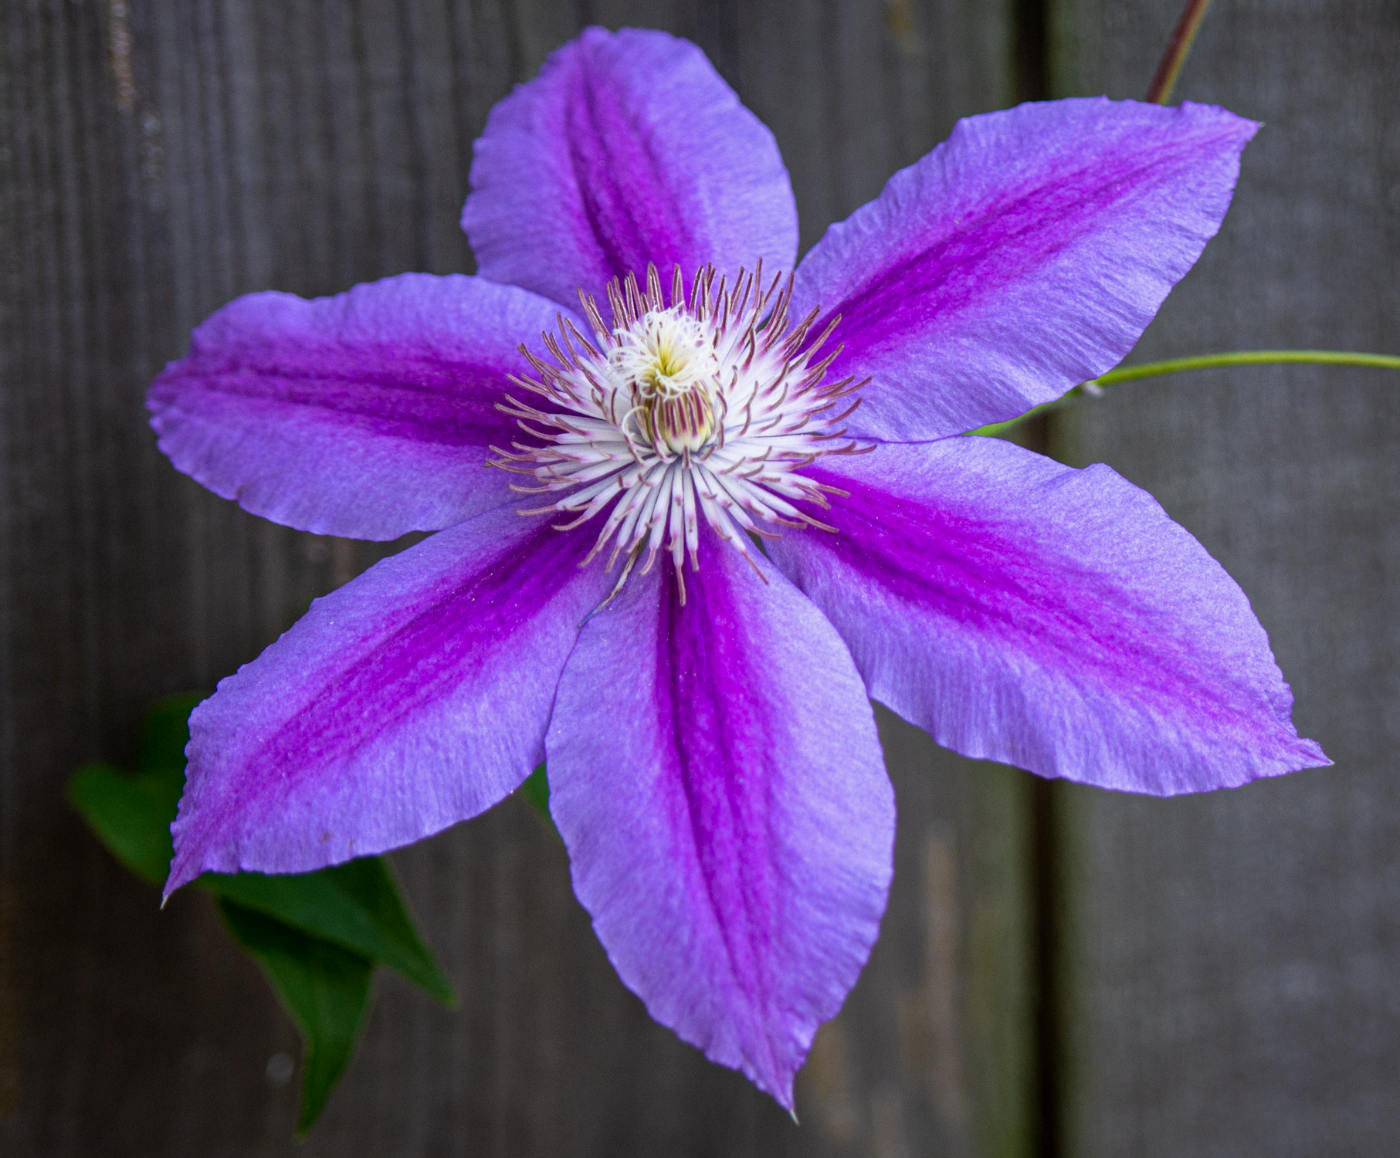 large flower with six purple petals and a feathery white center on a gray wooden background